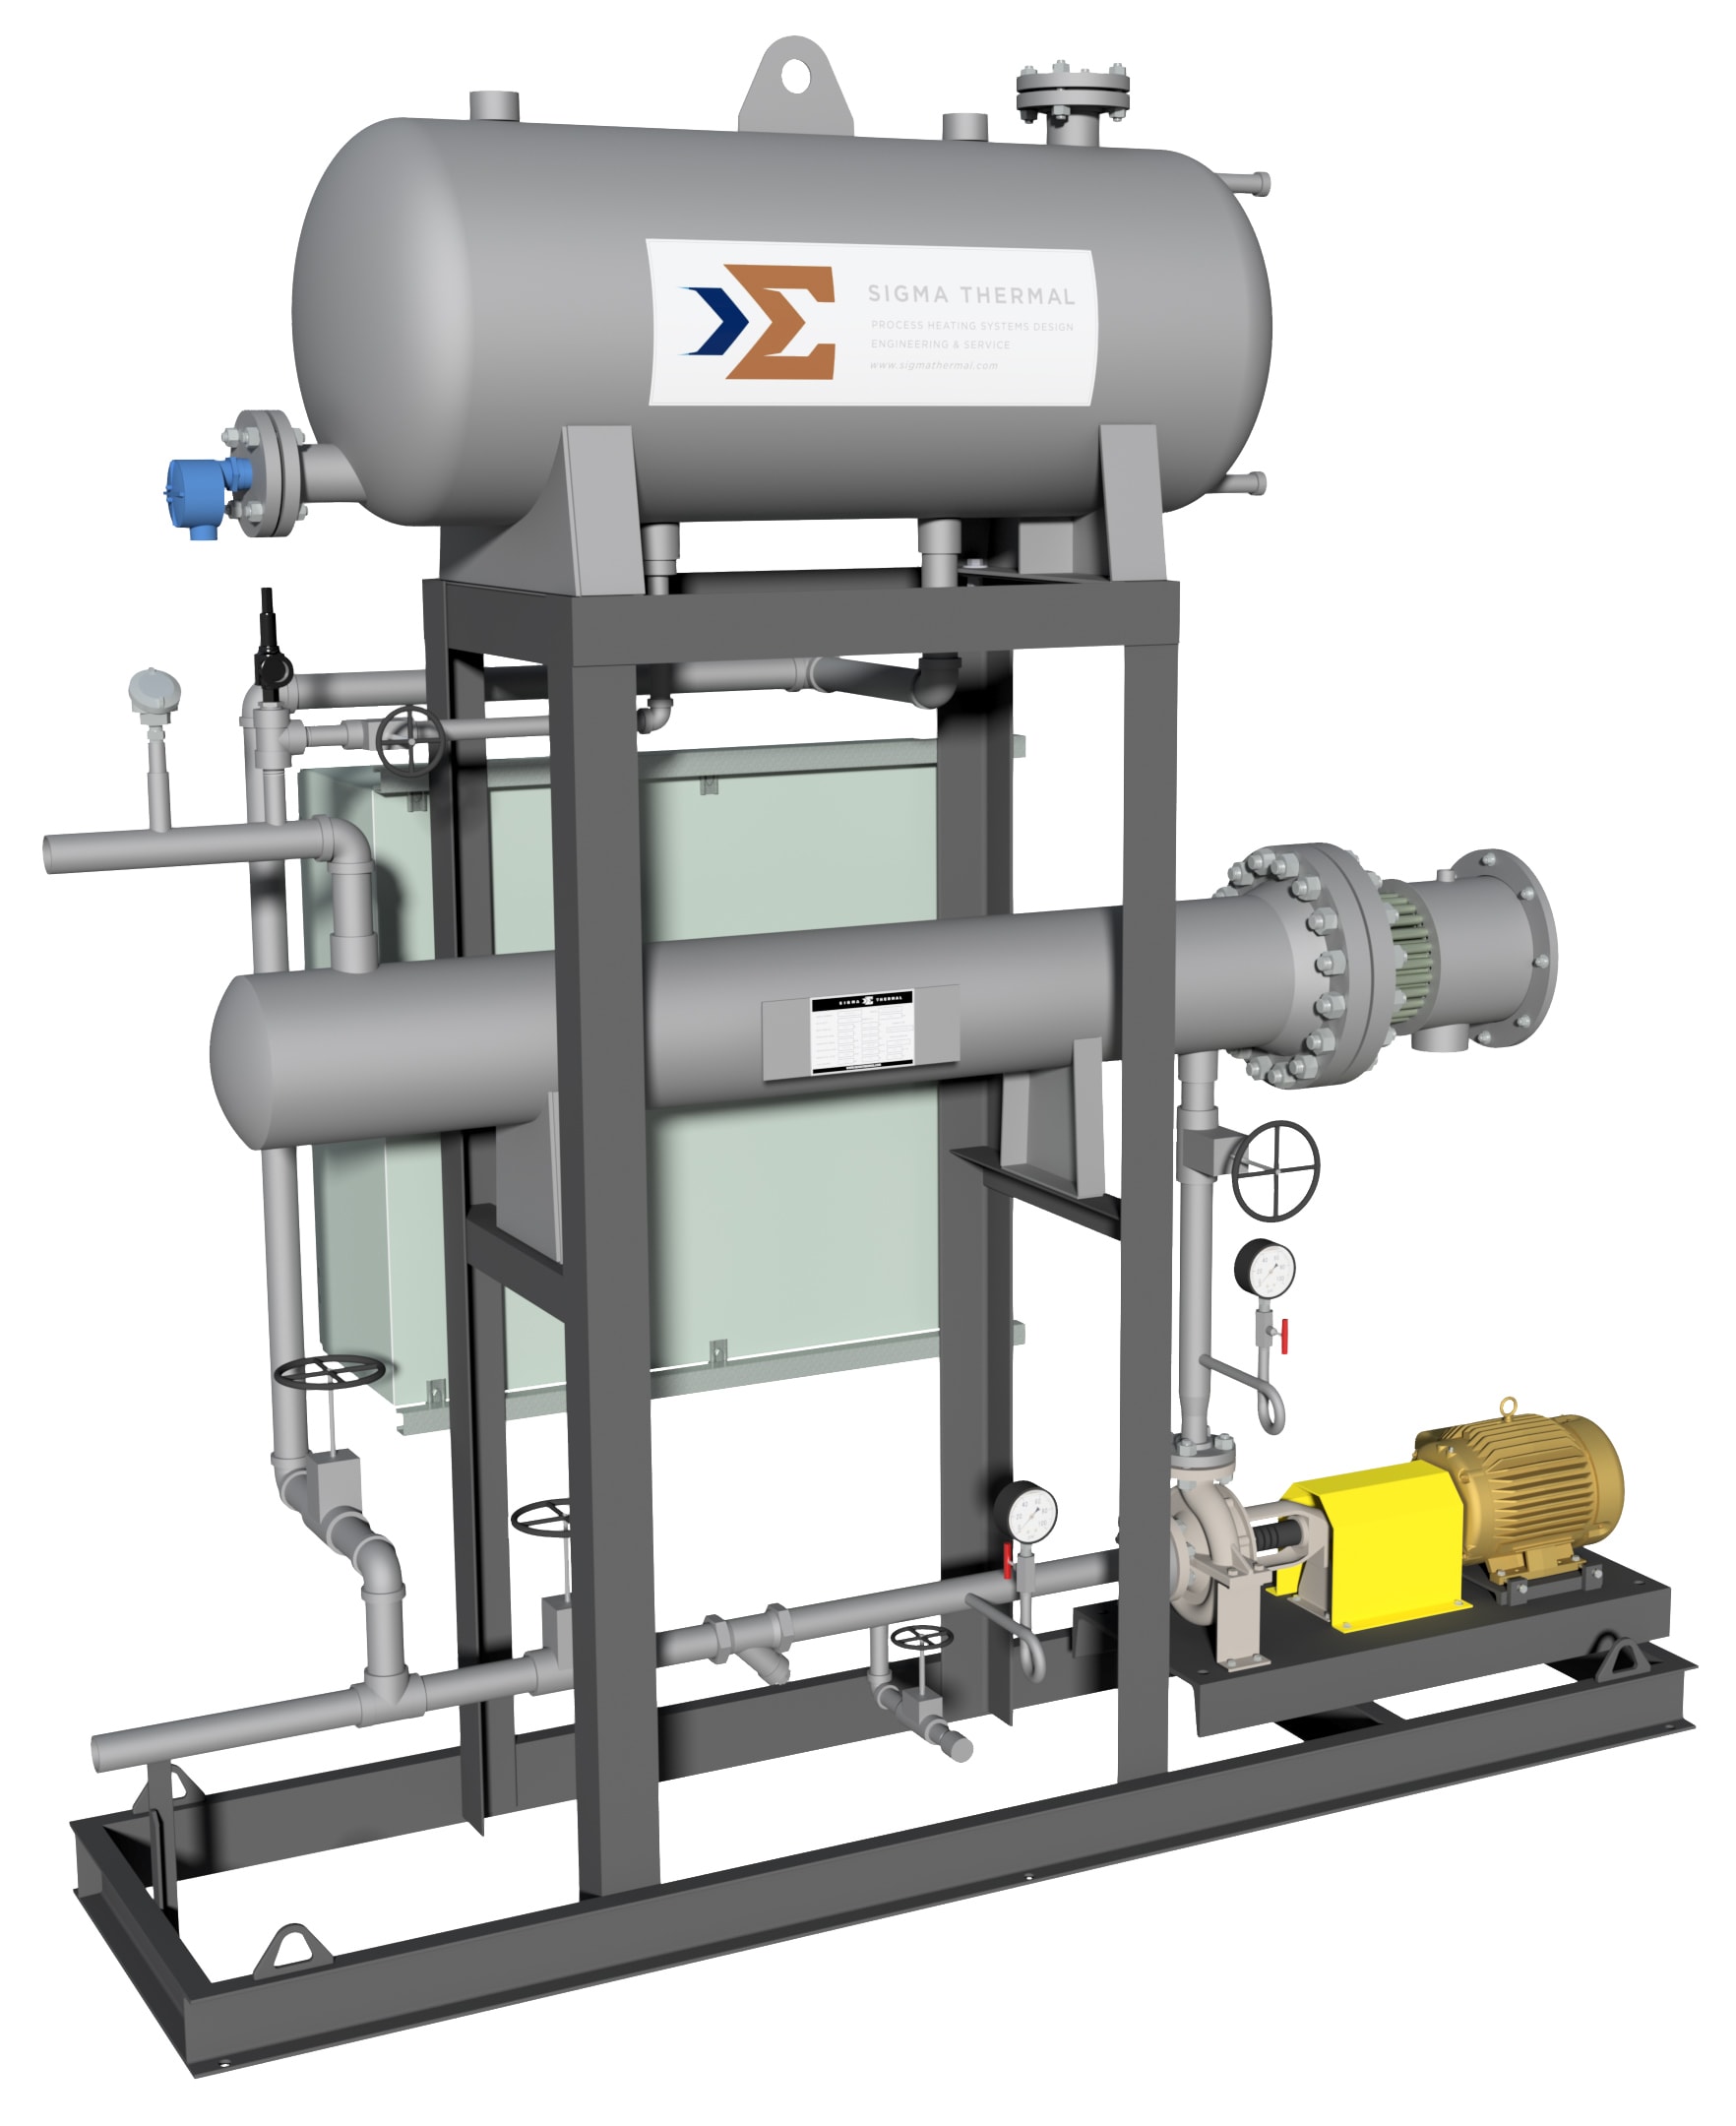 Pre-Engineered SHOTS Electric Thermal Fluid Heater